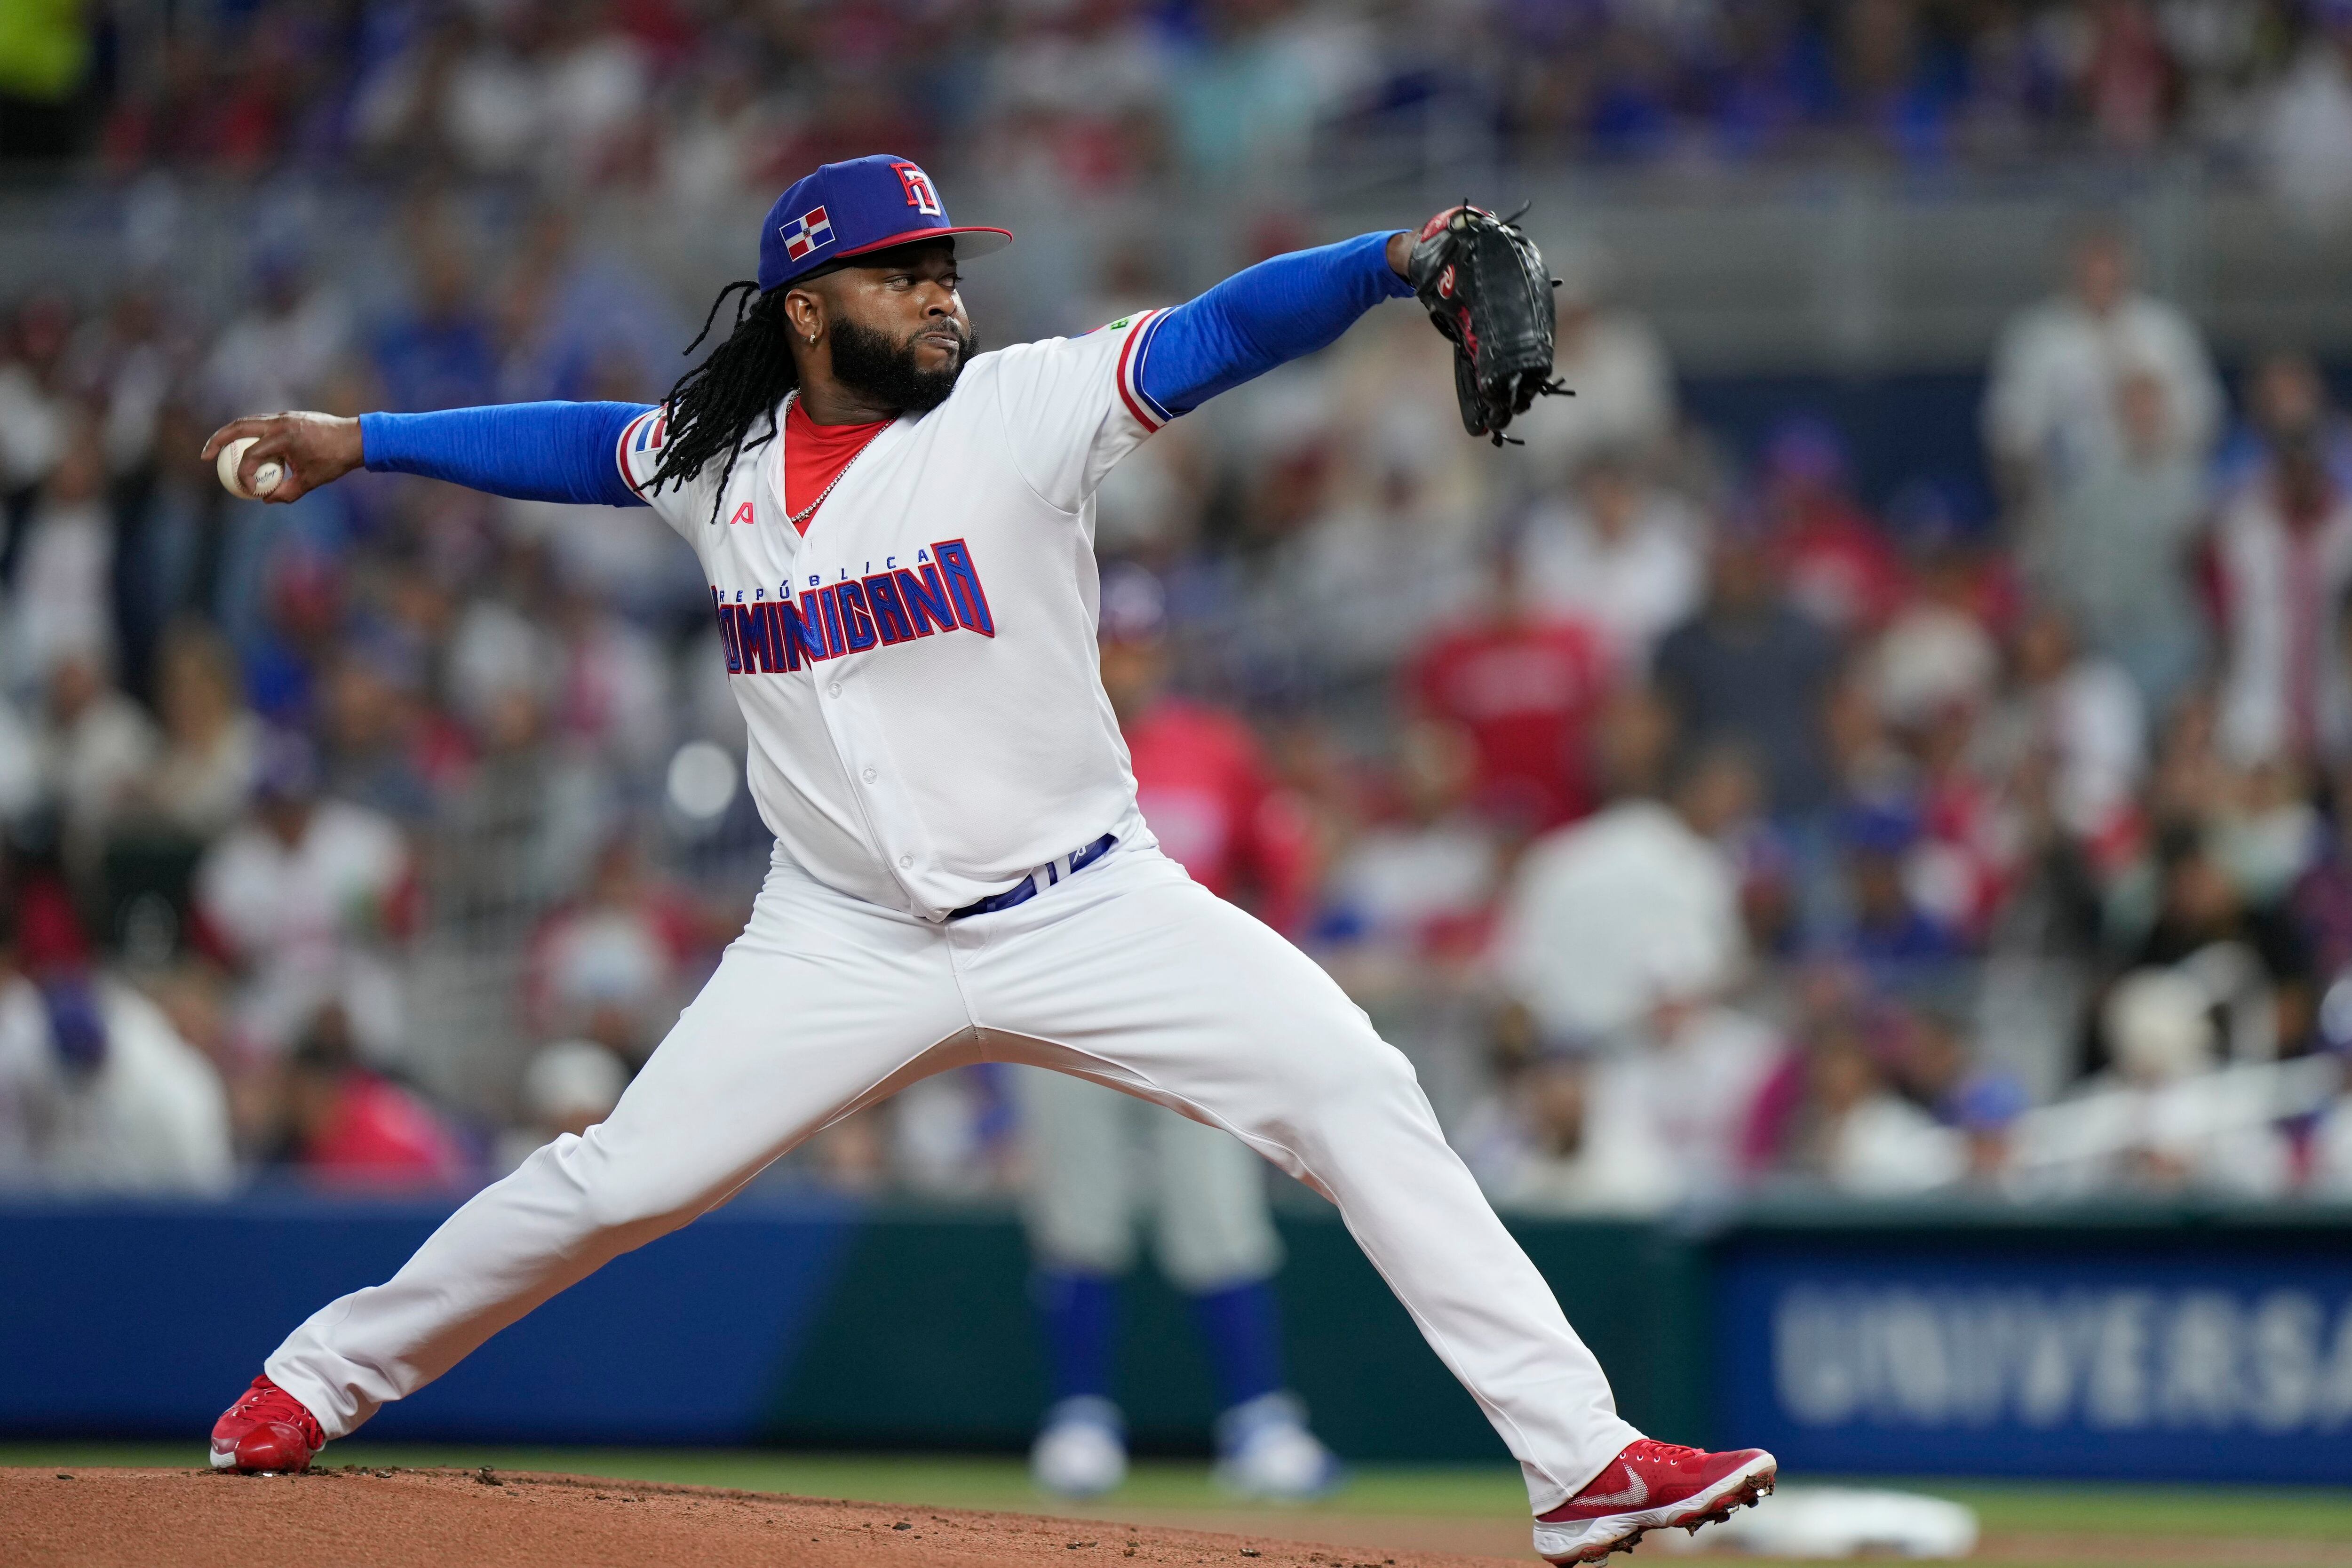 Johnny Cueto after White Sox' loss: 'We need to fight. We need to show the  fire' - Chicago Sun-Times